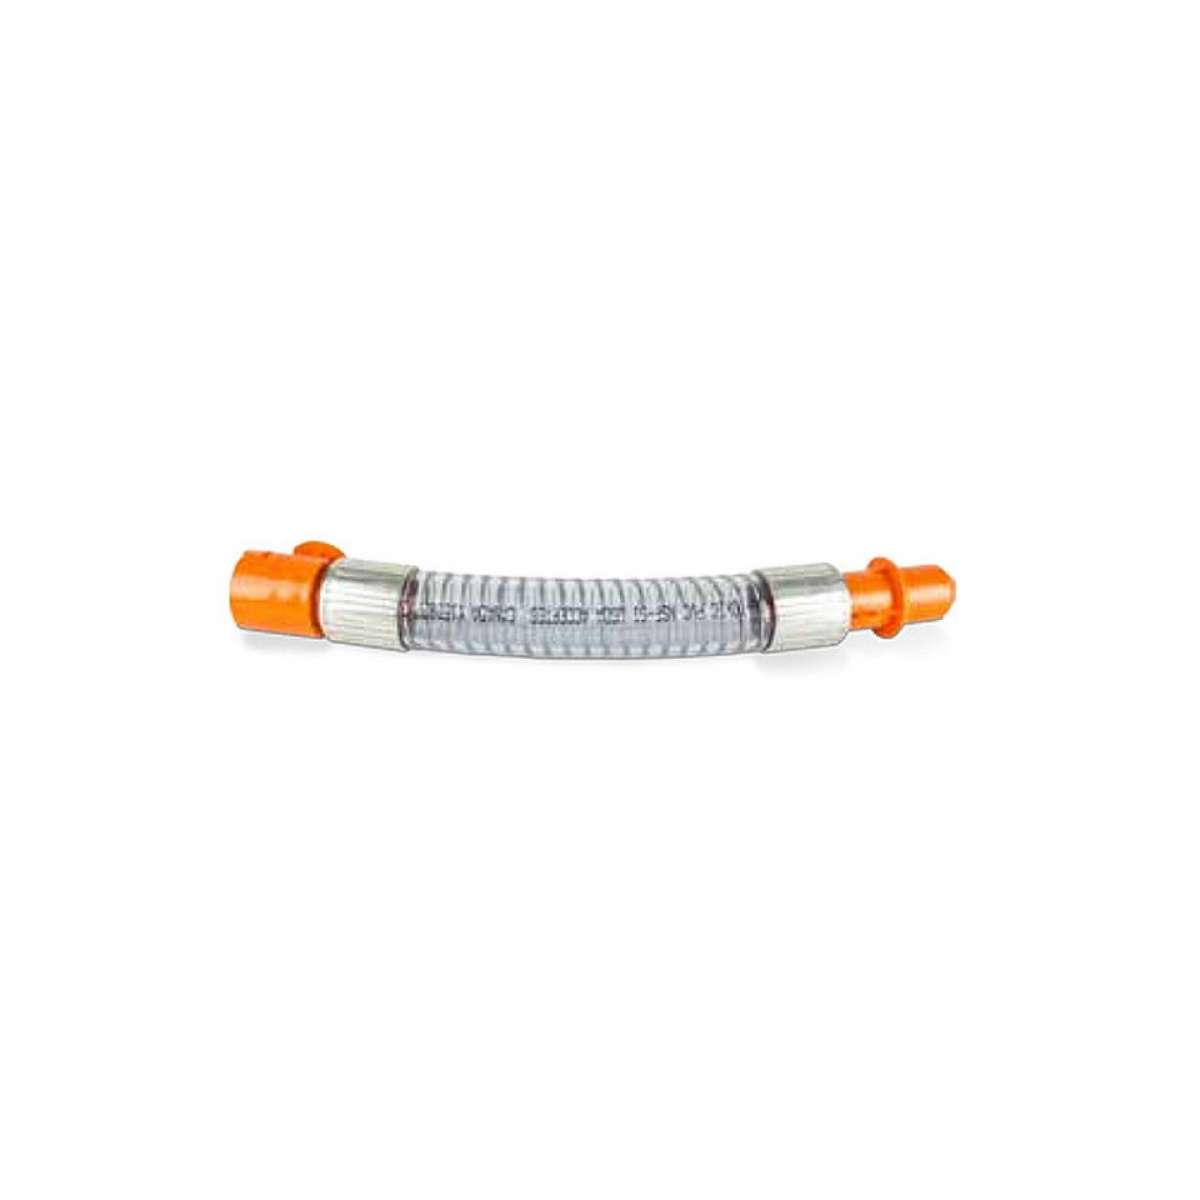 IsoLink 16" Extended Spout with 1" Tip - Orange